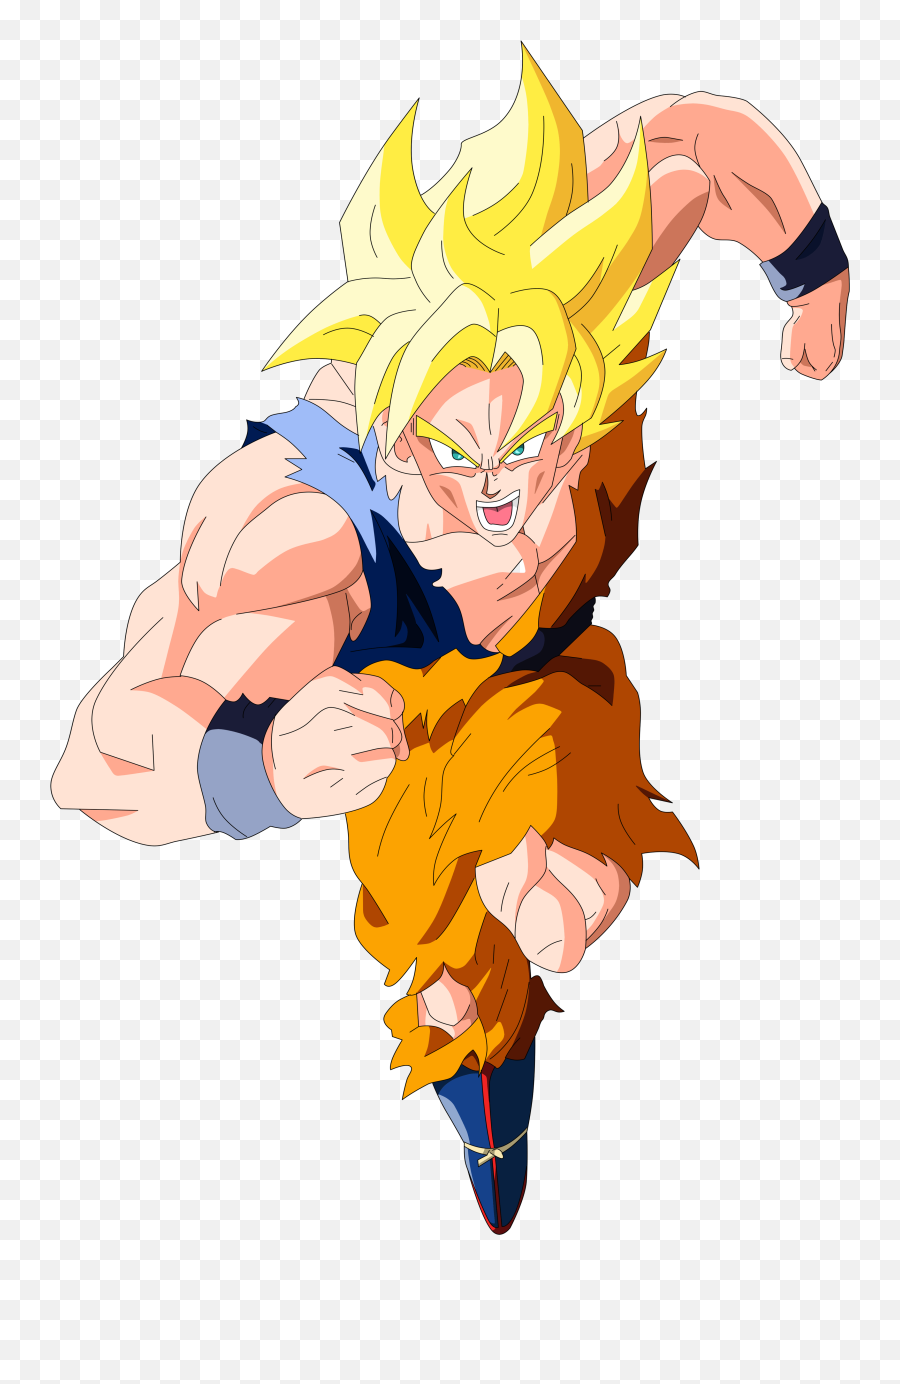 Who Is The Fastest Anime Character - Goku Super Saiyan Anime Character Flying Png Emoji,Angry Emoticon Facebook Super Sayian